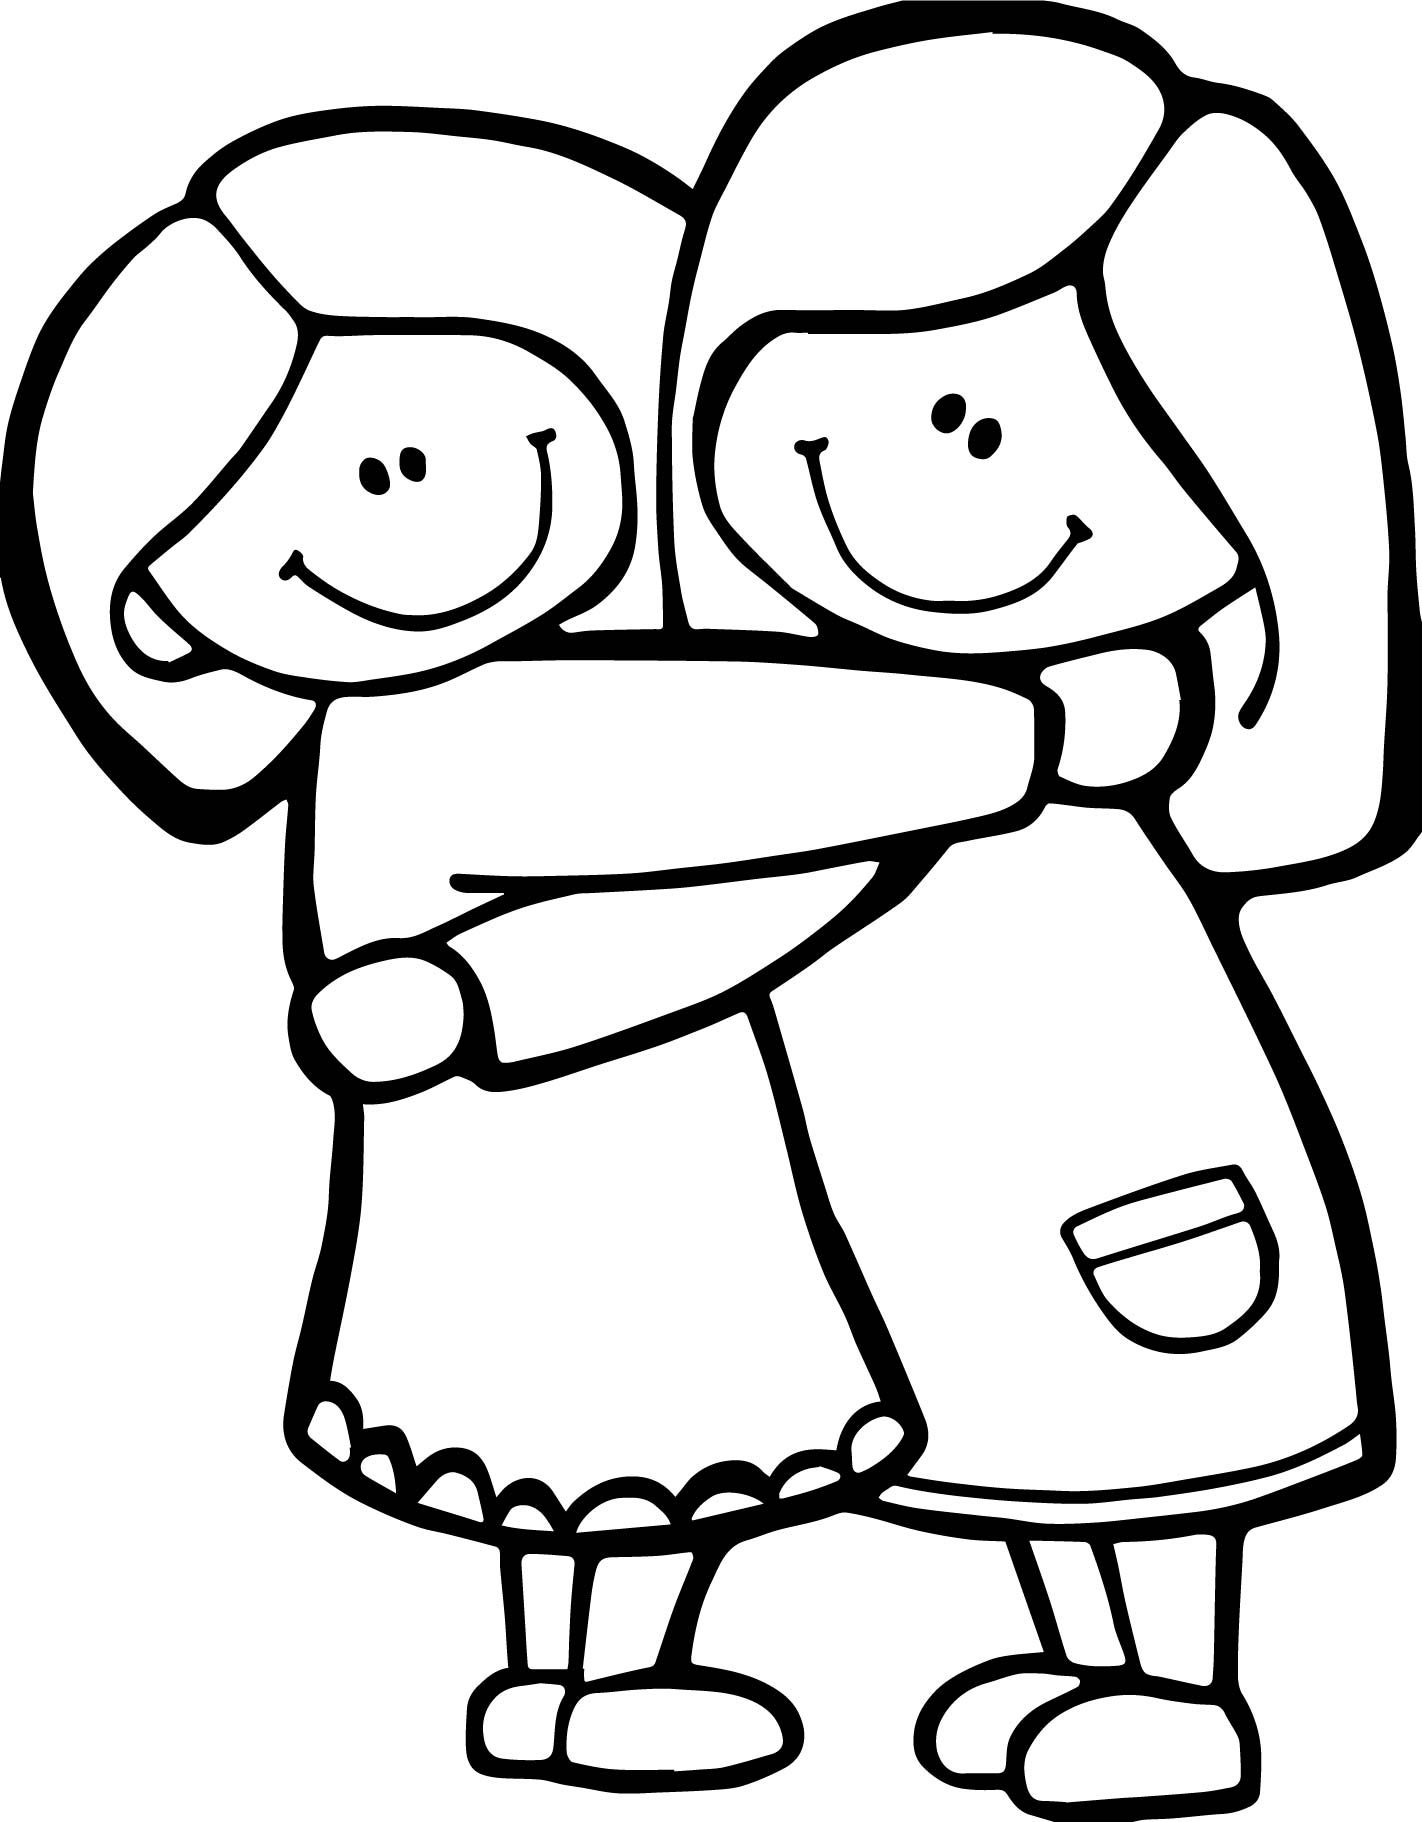 Best Friends Girl Mother Hug Coloring Page | Friends hugging, Coloring pages,  Nemo coloring pages